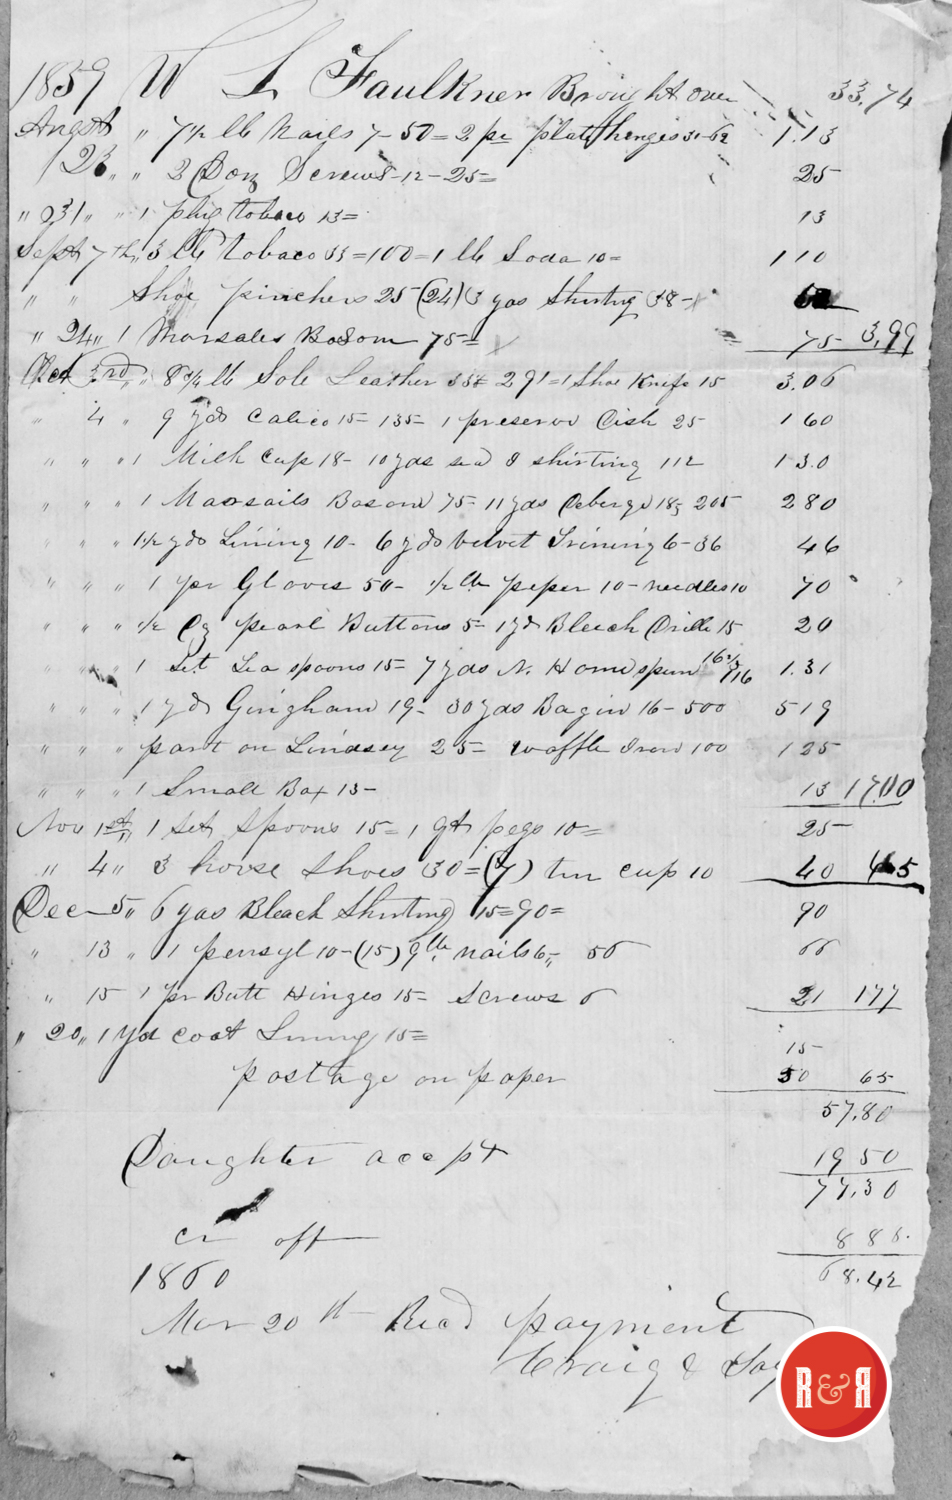 LEDGER FROM CRAIG AND TAYLOR - 1860, p. 4